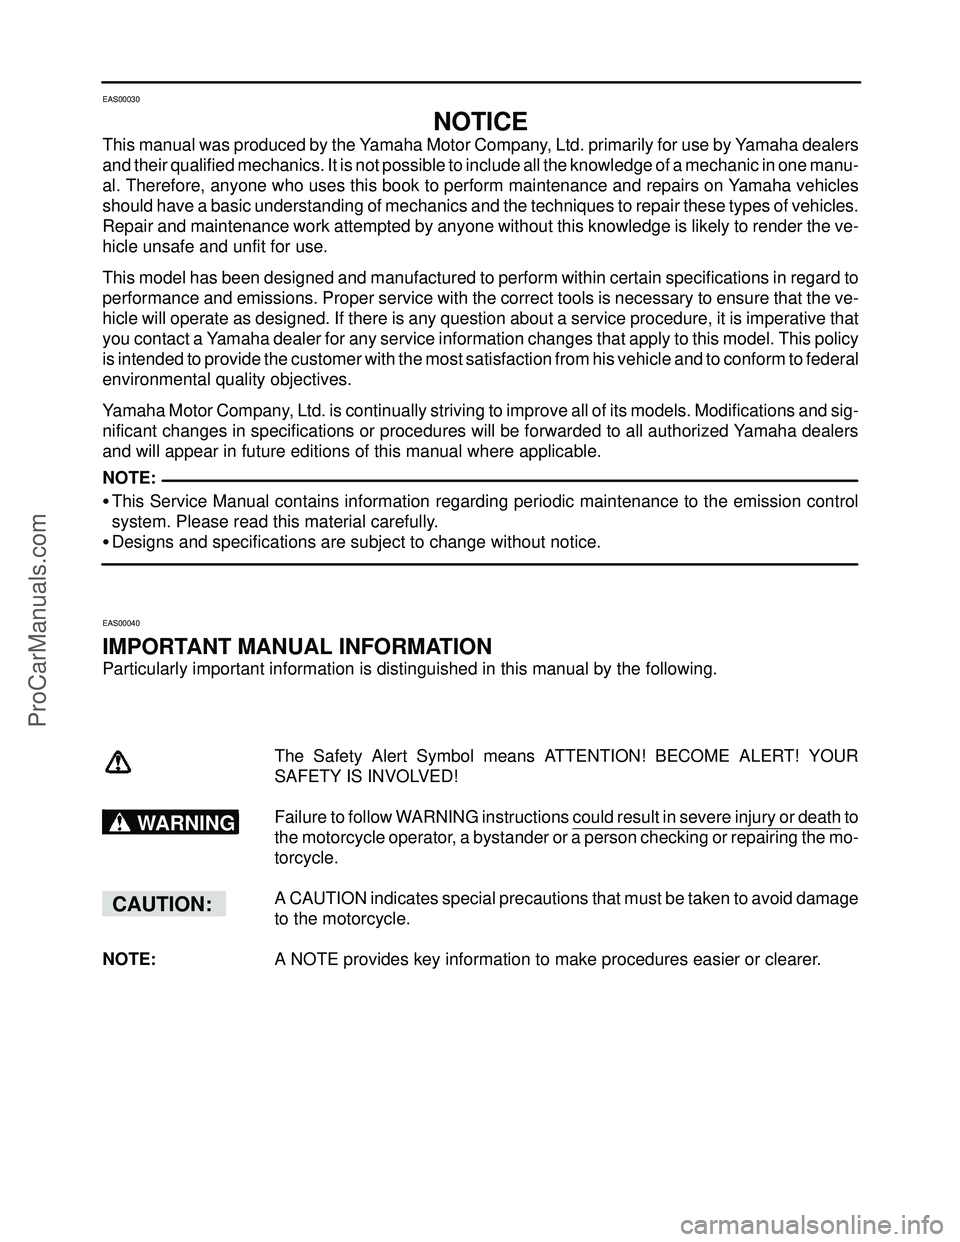 YAMAHA YZF-R1SC 2004  Service Manual NOTE:
WARNING
CAUTION:
EAS00030
NOTICE
This manual was produced by the Yamaha Motor Company, Ltd. primarily for use by Yamaha dealers
and their qualified mechanics. It is not possible to include all t